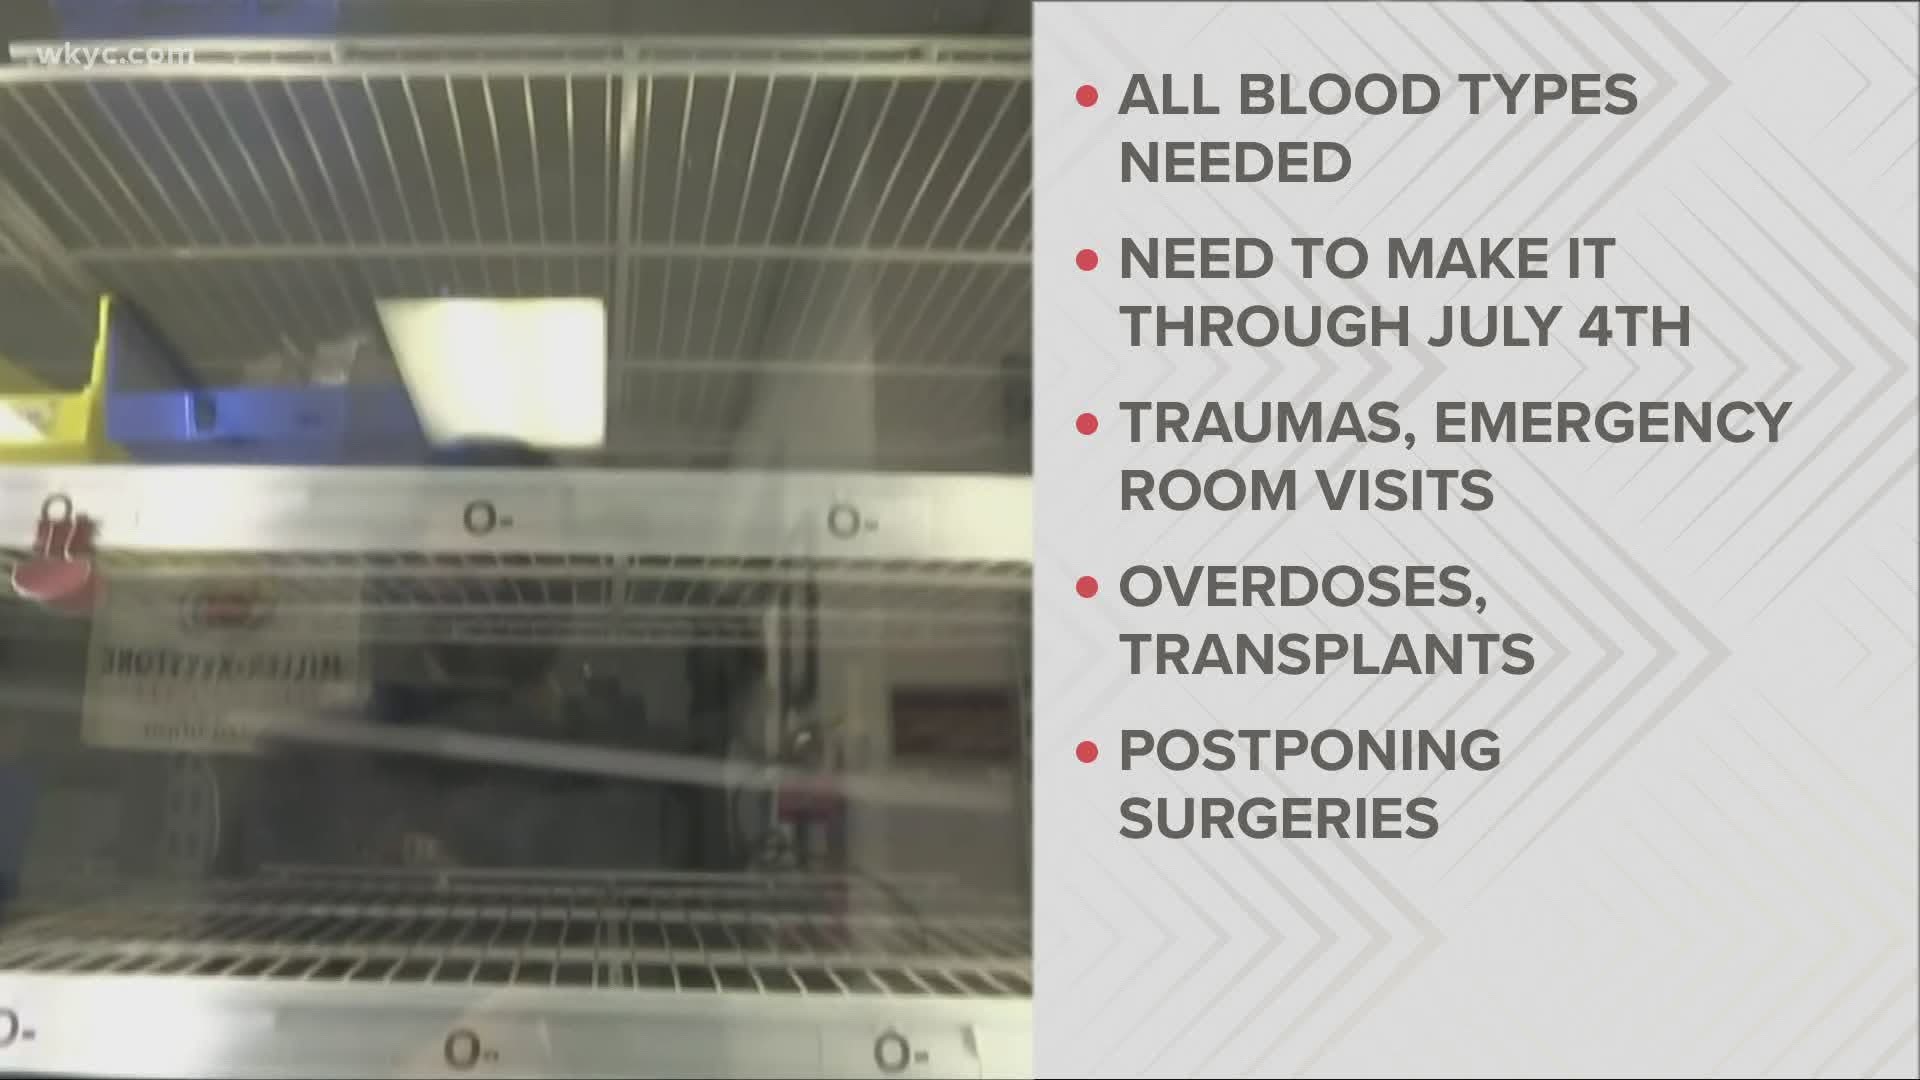 The American Red Cross is making another push to find more blood donors. This comes amid a “severe blood shortage” that is impacting the entire country.